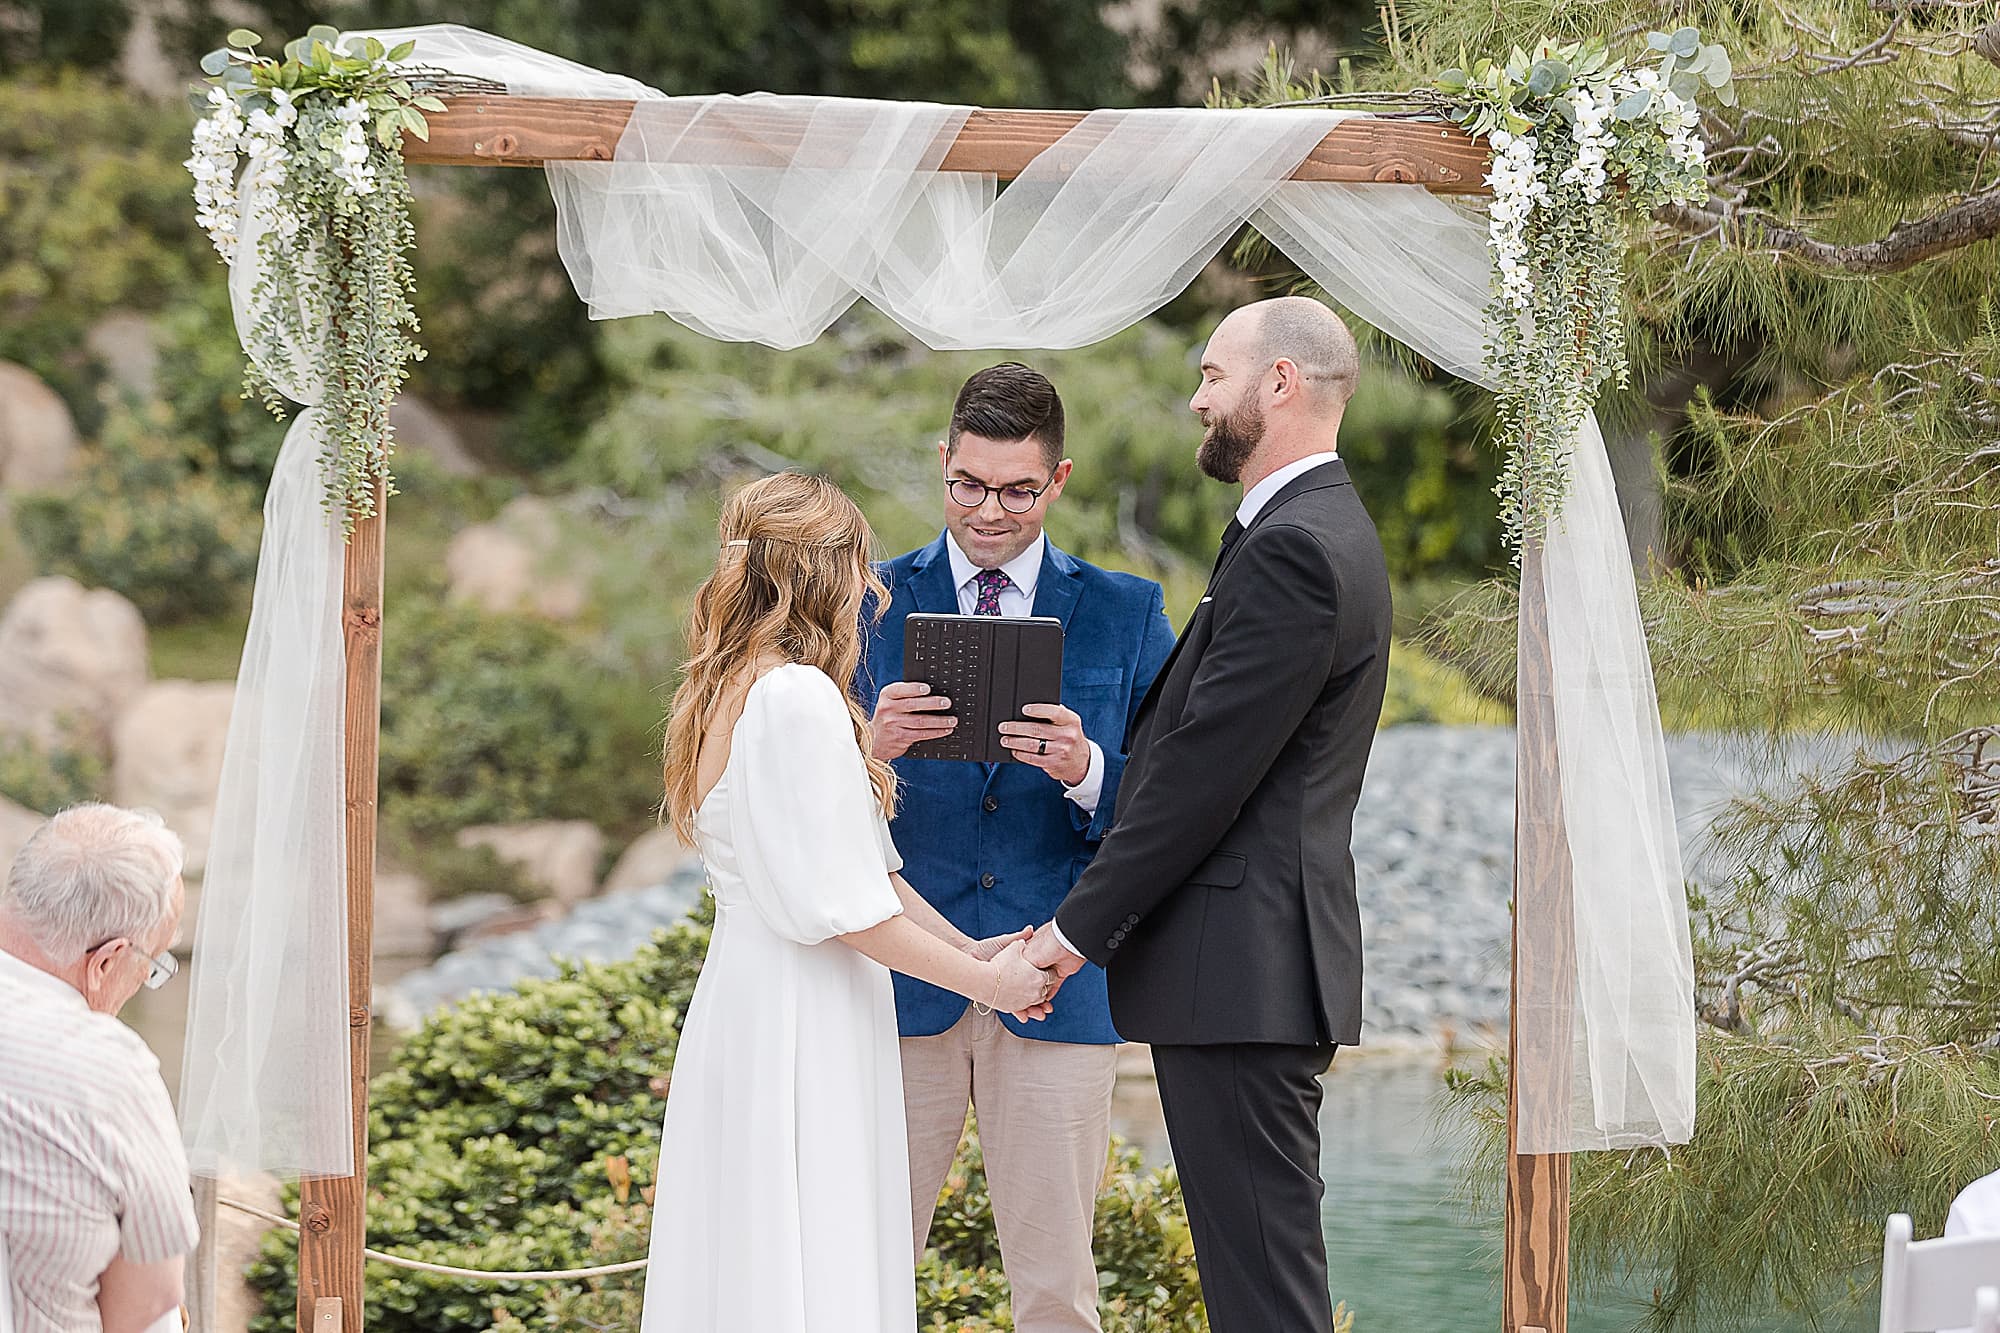 Tips for Best Ceremony Photos by Affordable Wedding Photographers